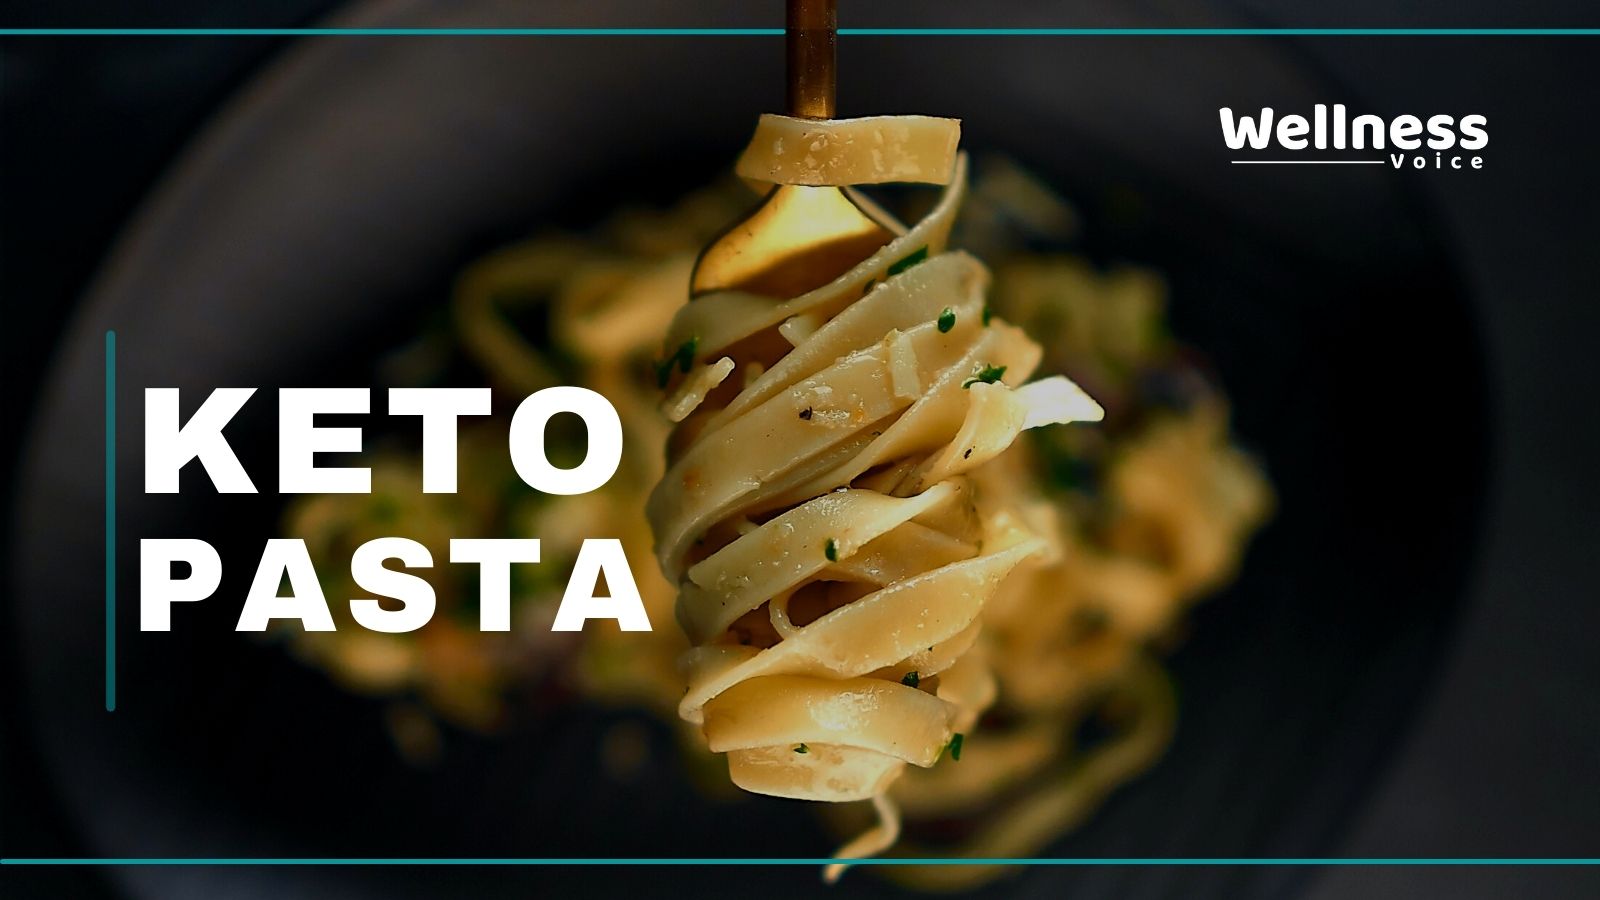 The Complete Guide for Keto Pasta